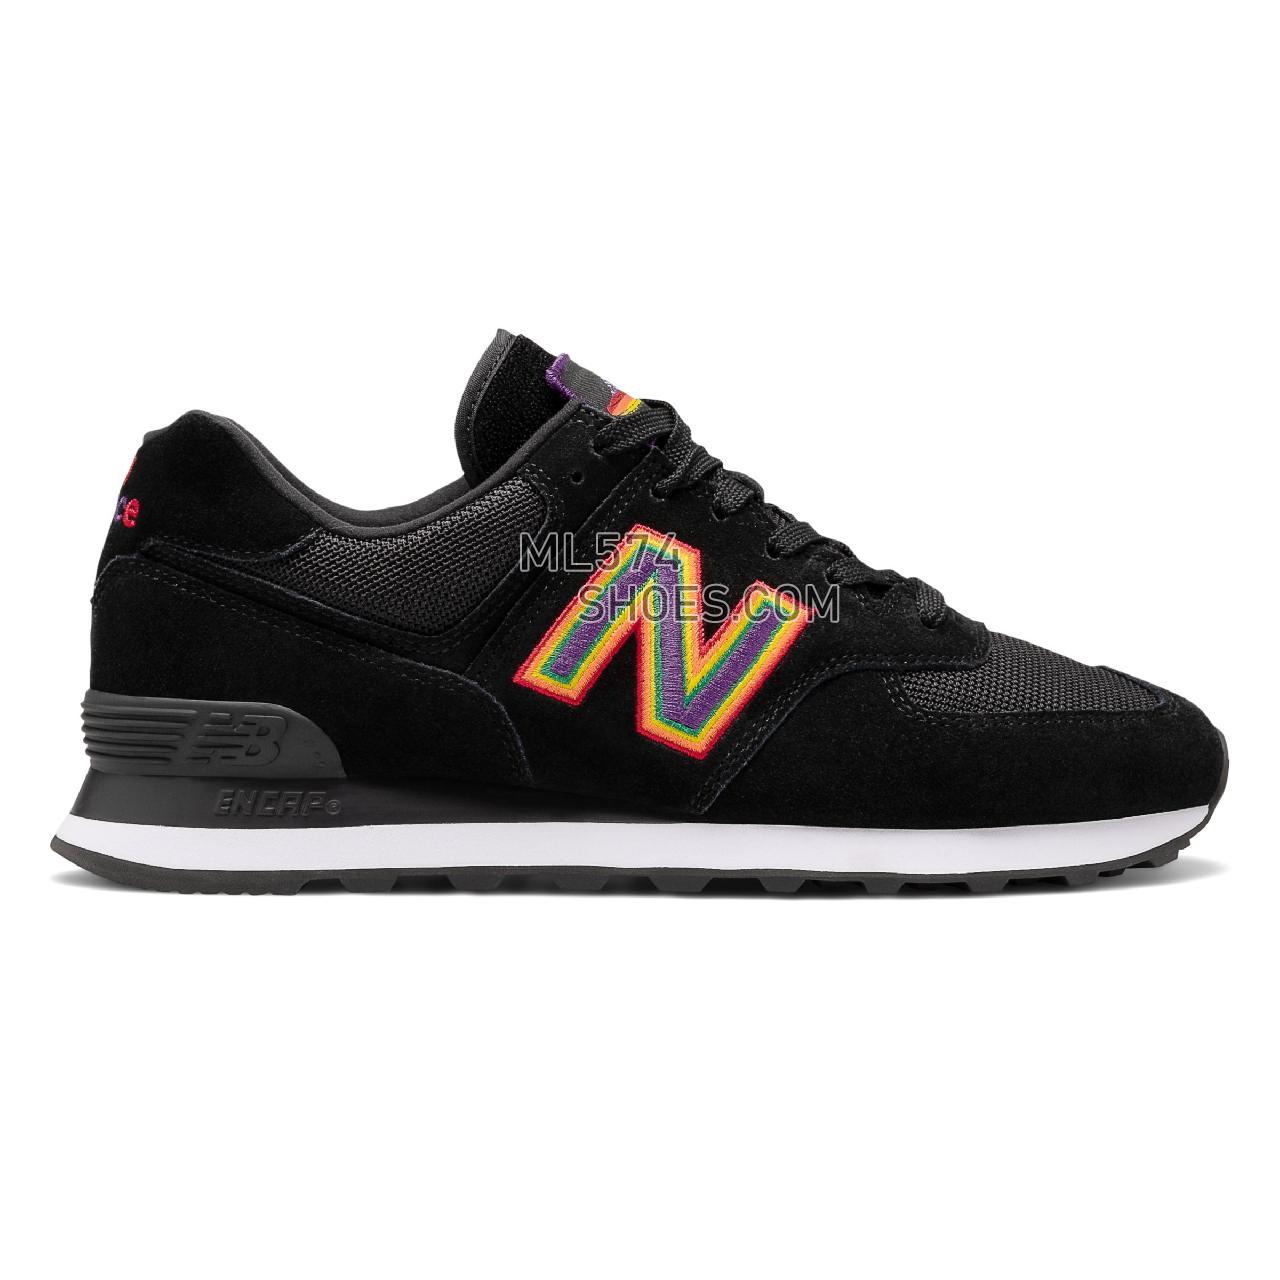 New Balance Unisex 574 Pride Pack - Men's Classic Sneakers - Black with White - U574GPM